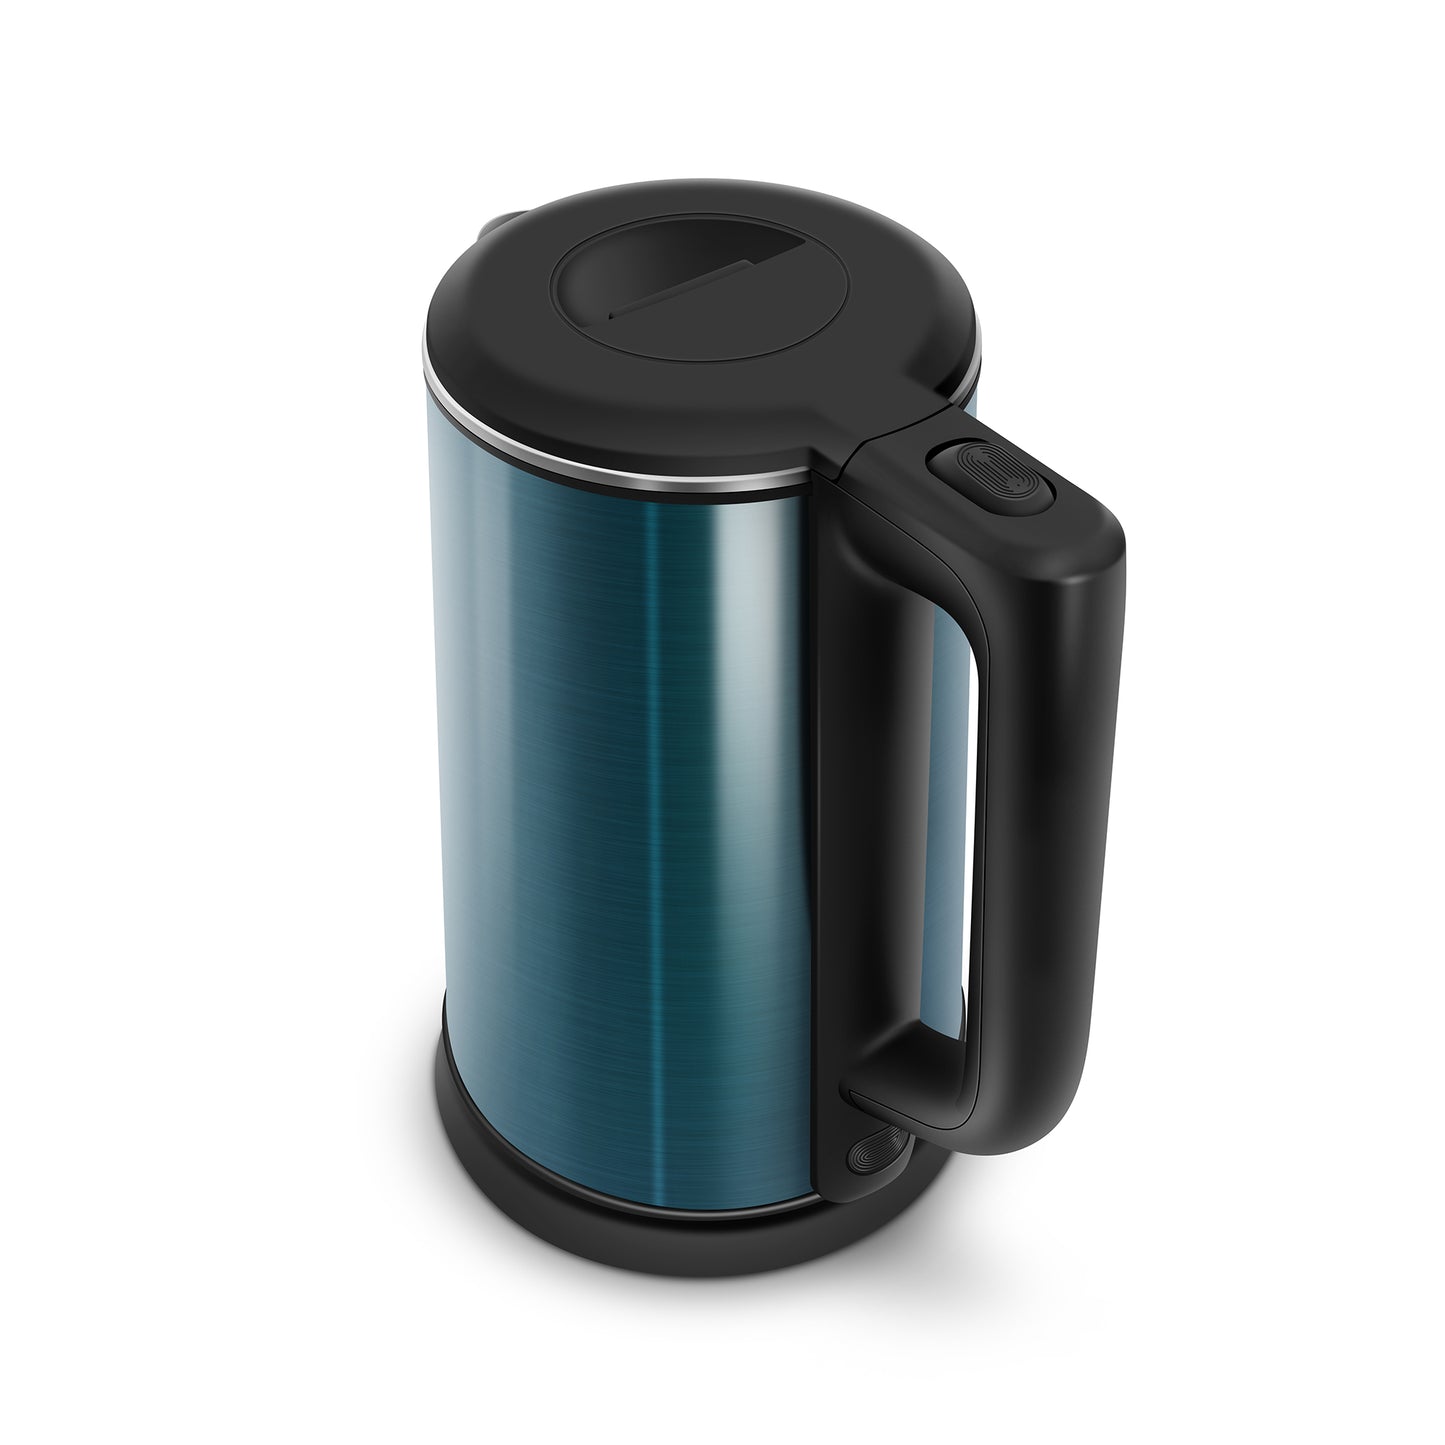 Wipro Vesta Enhanced Cool Touch 1.8 L Electric Kettle